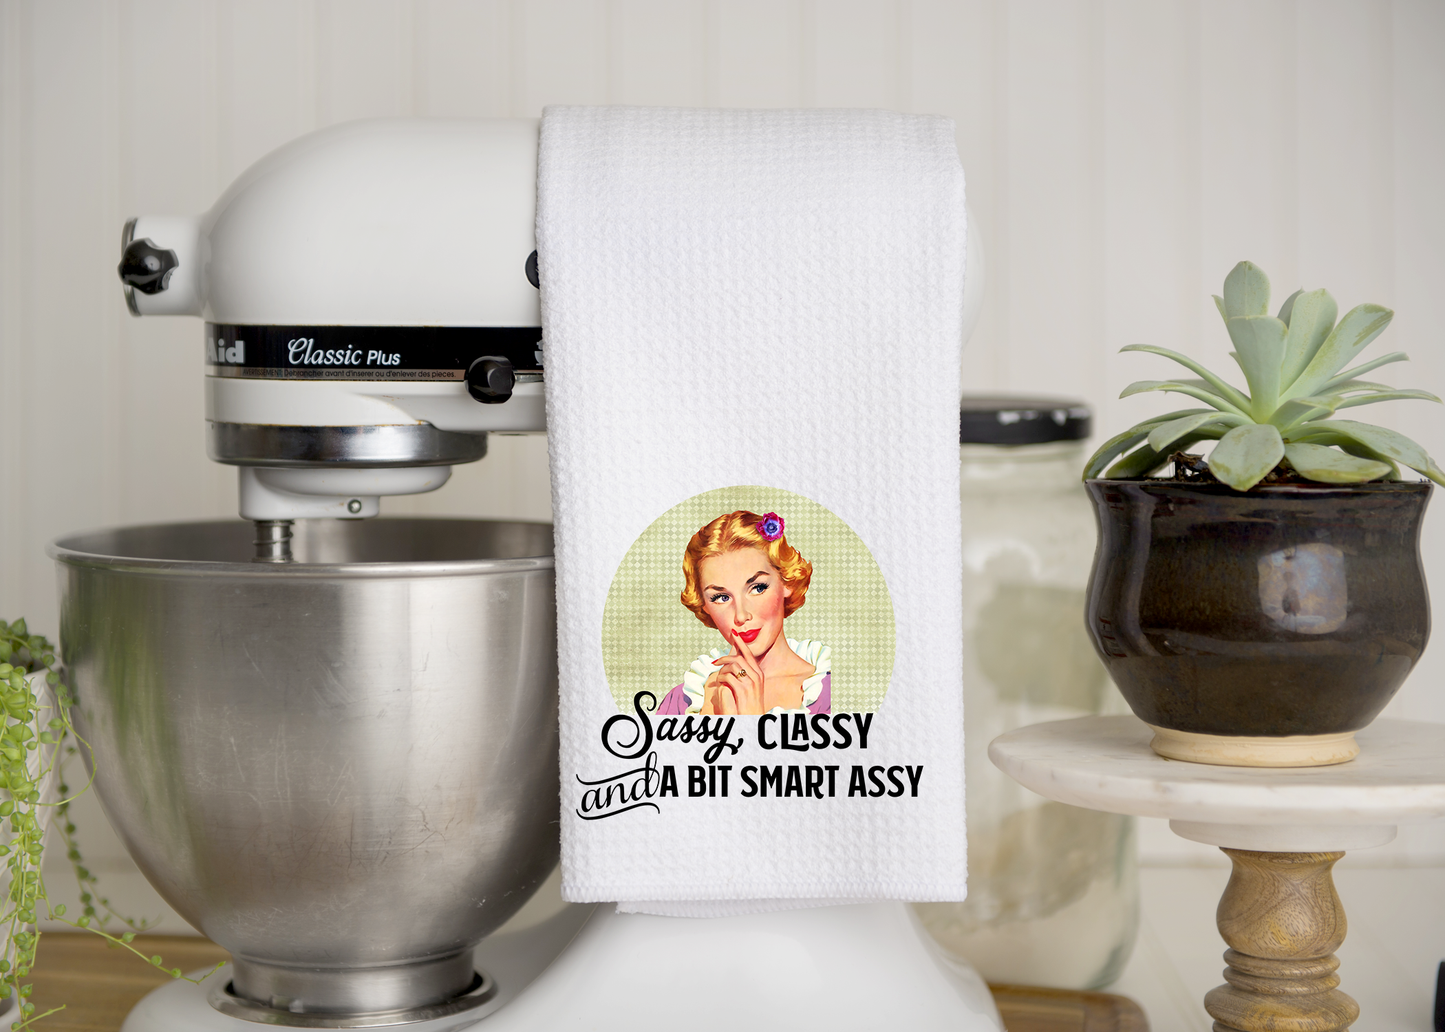 Sassy, Classy and a Bit Smart Assy Towel